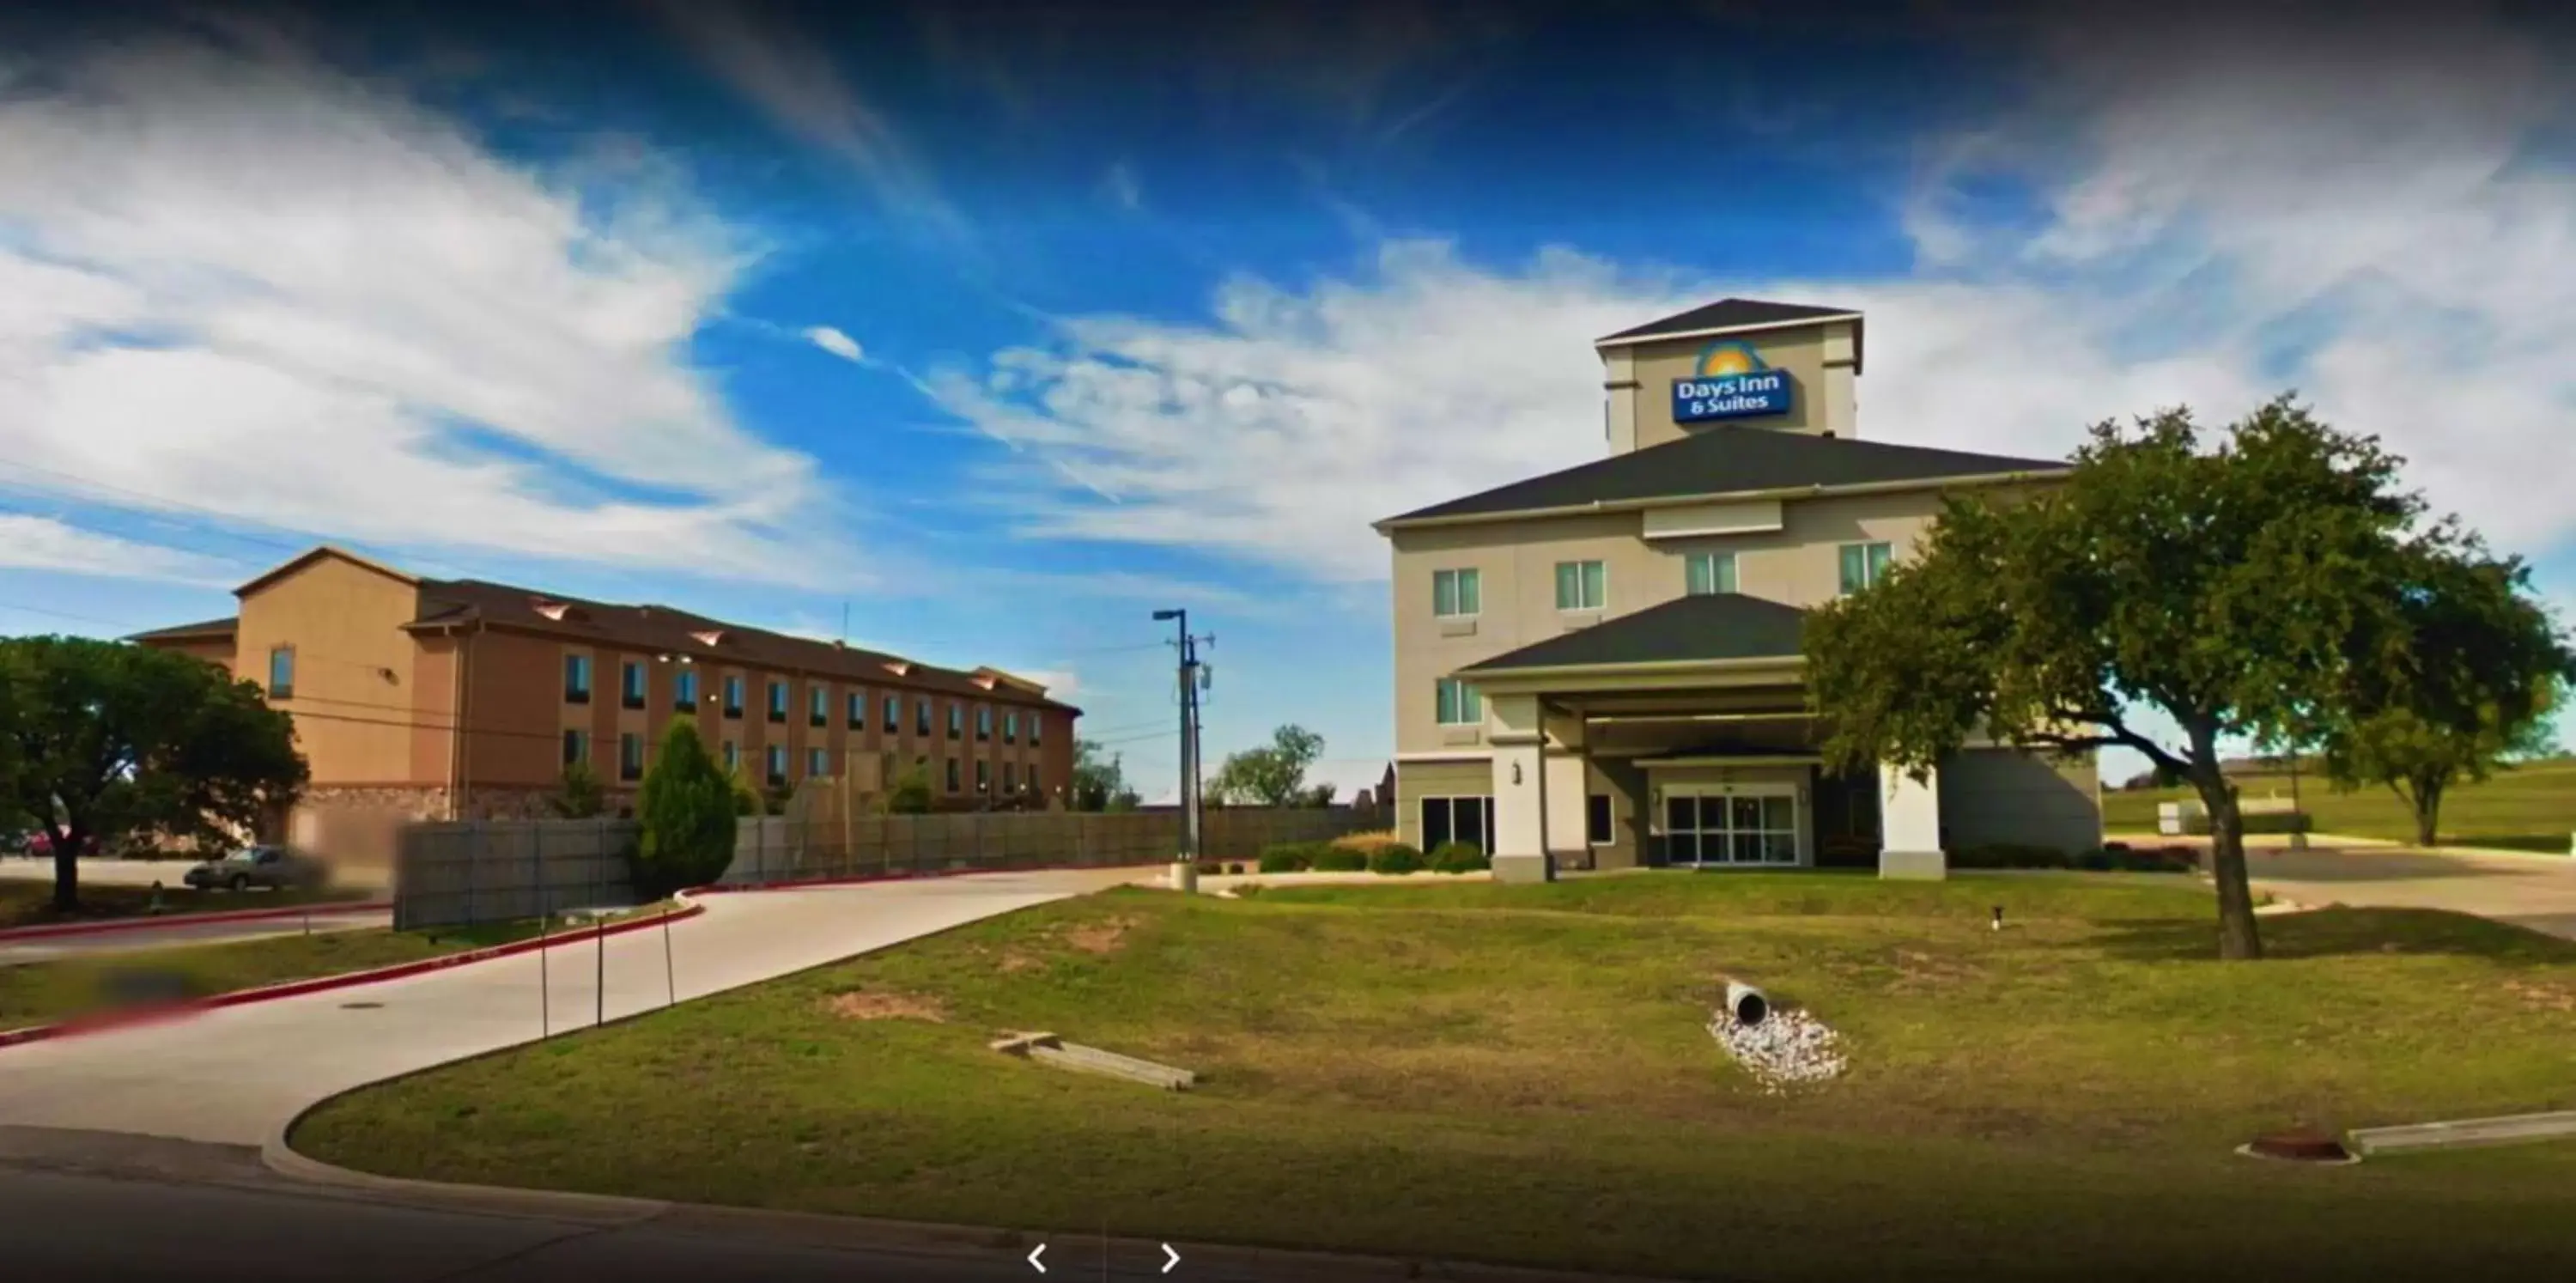 Property Building in Days Inn & Suites by Wyndham Mineral Wells